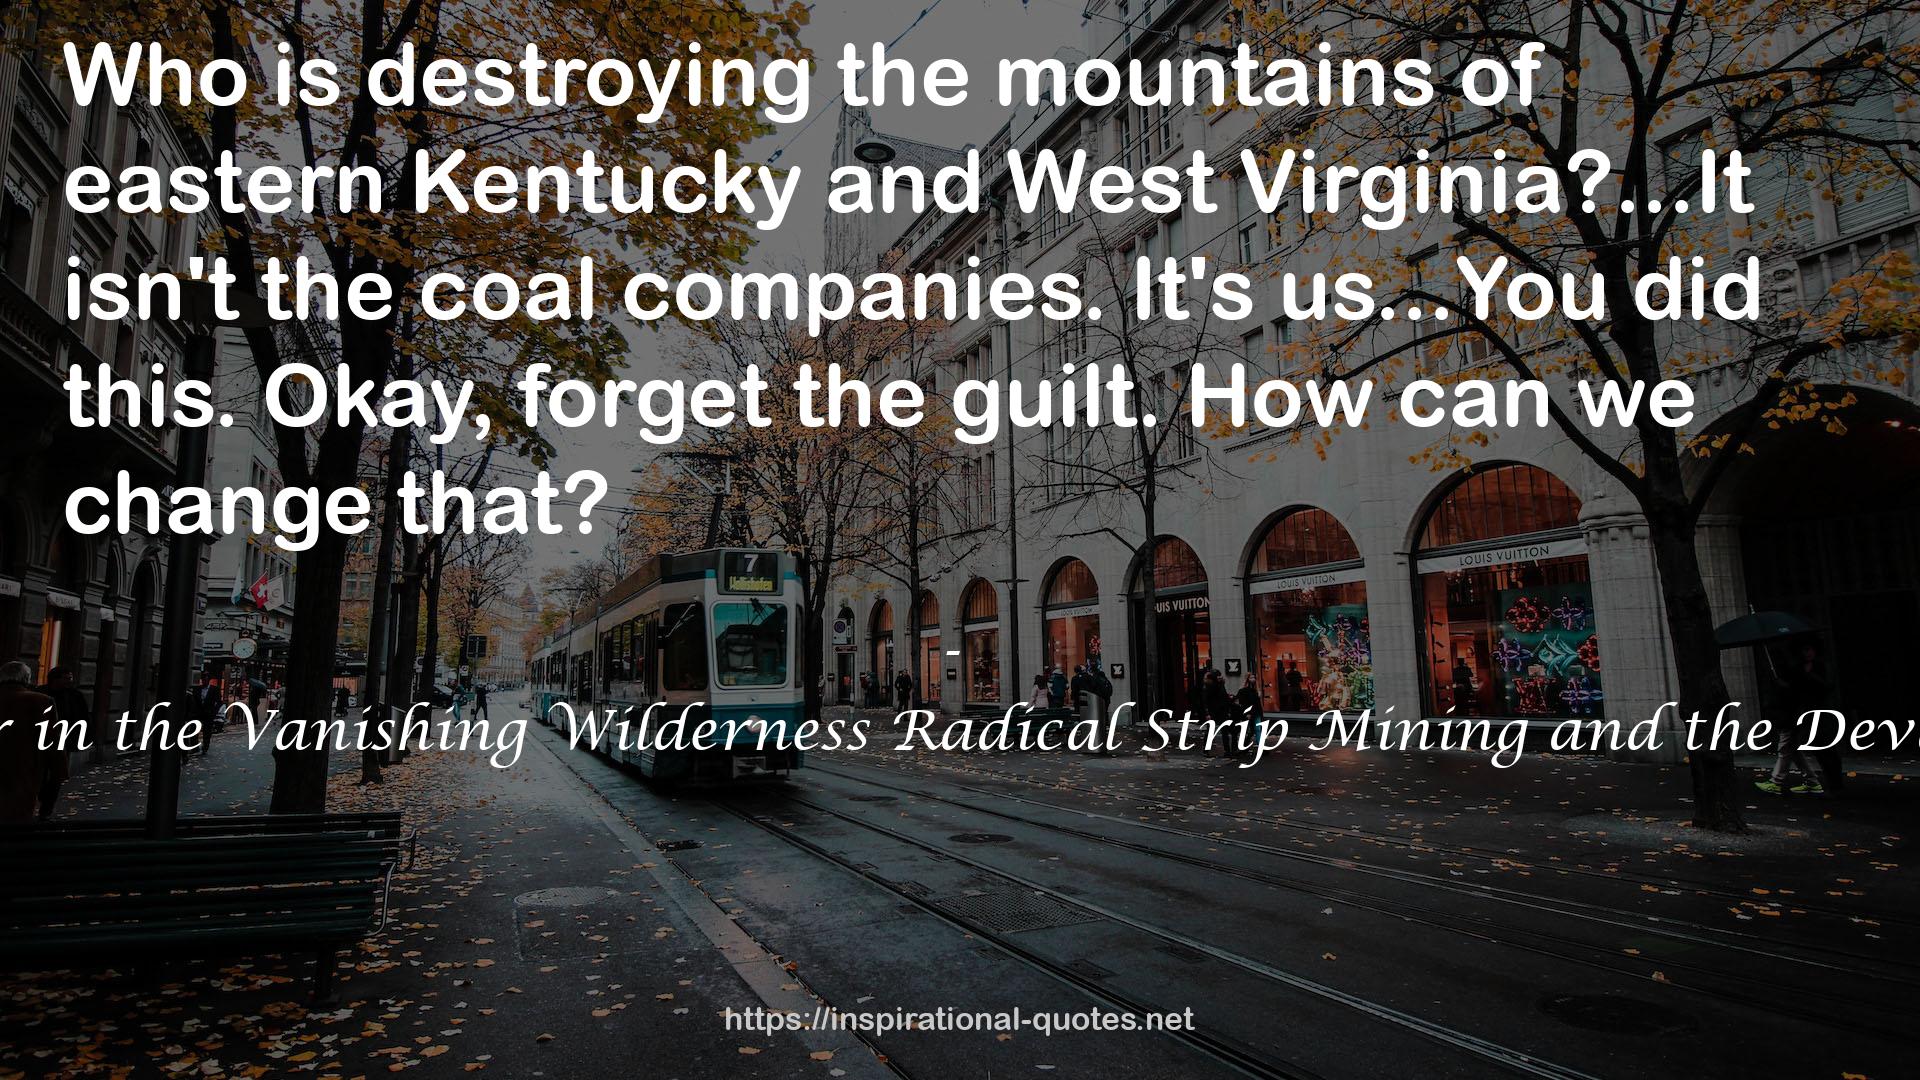 Lost Mountain: A Year in the Vanishing Wilderness Radical Strip Mining and the Devastation of Appalachia QUOTES